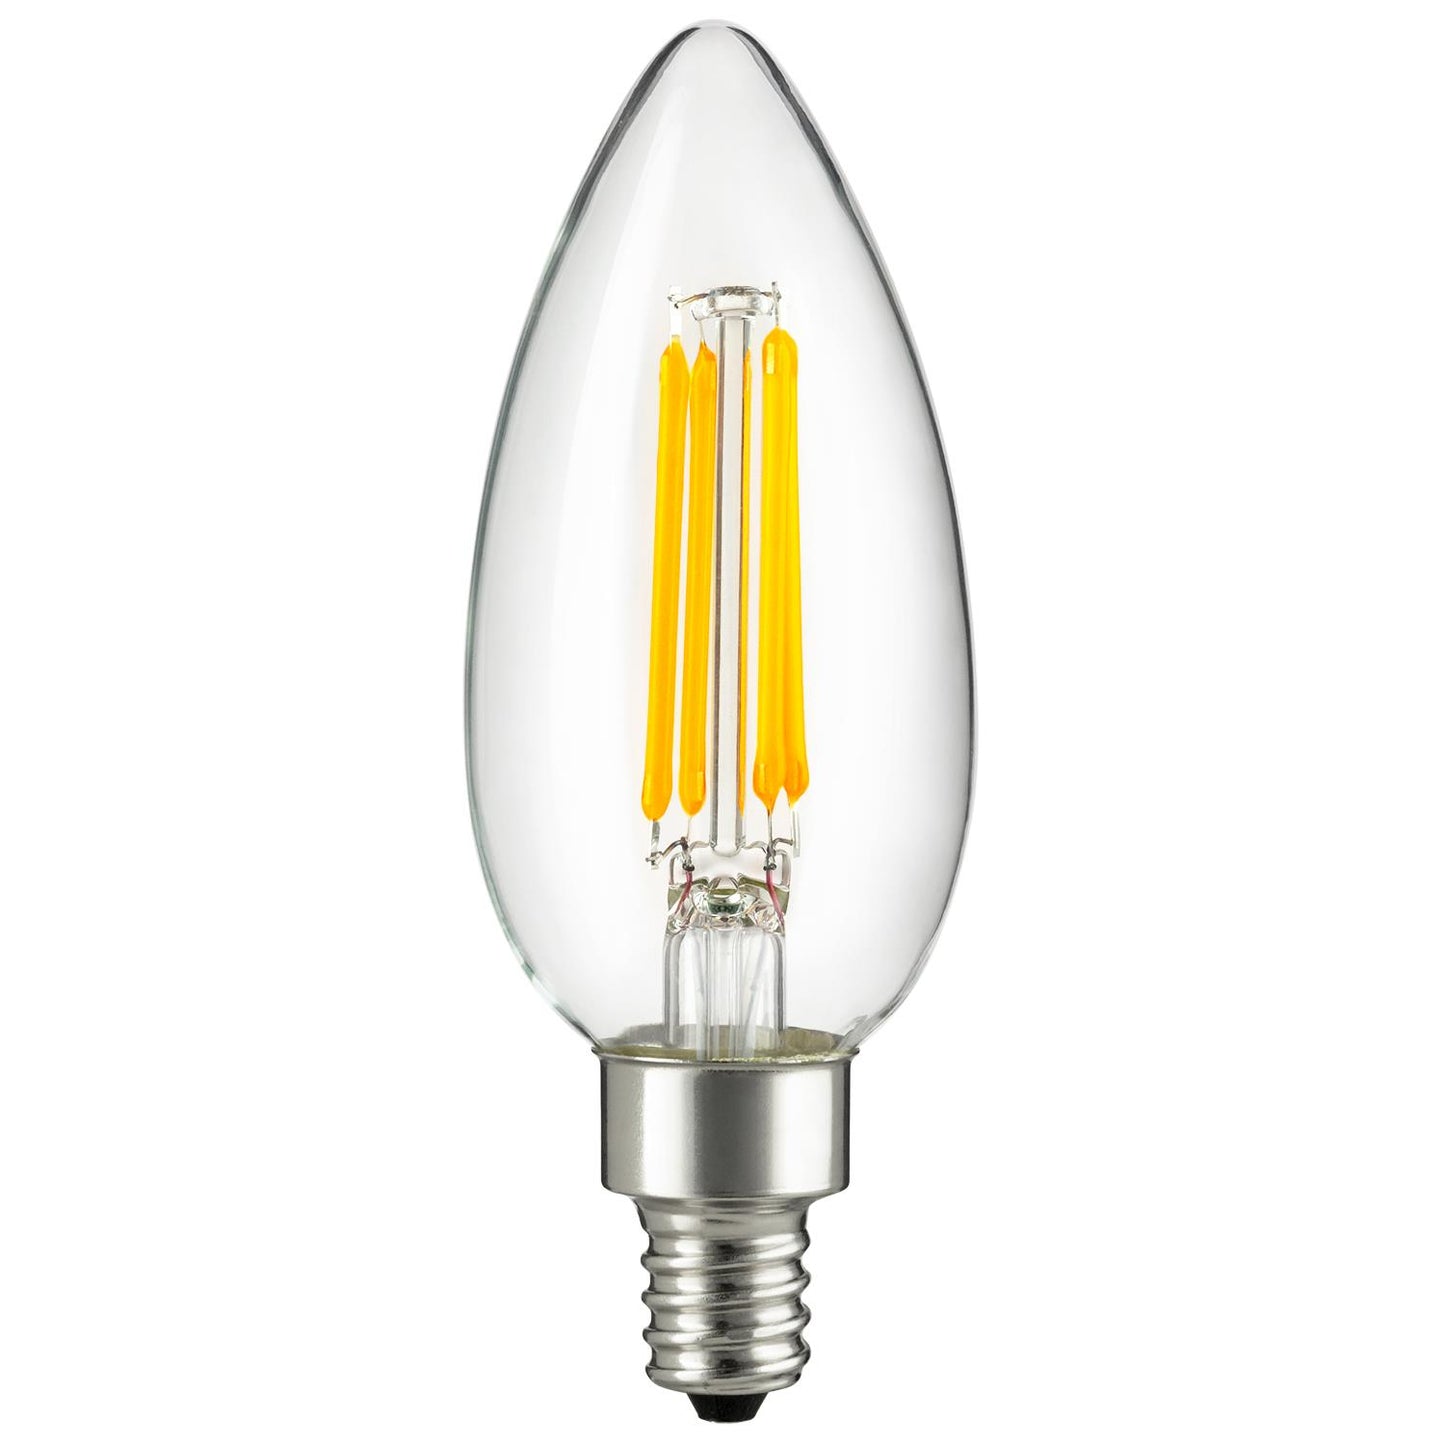 Sunlite 81110-SU LED Filament Chandelier Bulb with Torpedo Tip, 5 Watts (60W Equivalent), Candelabra Base (E12), Clear, Dimmable, 40K - Cool White 1 Pack